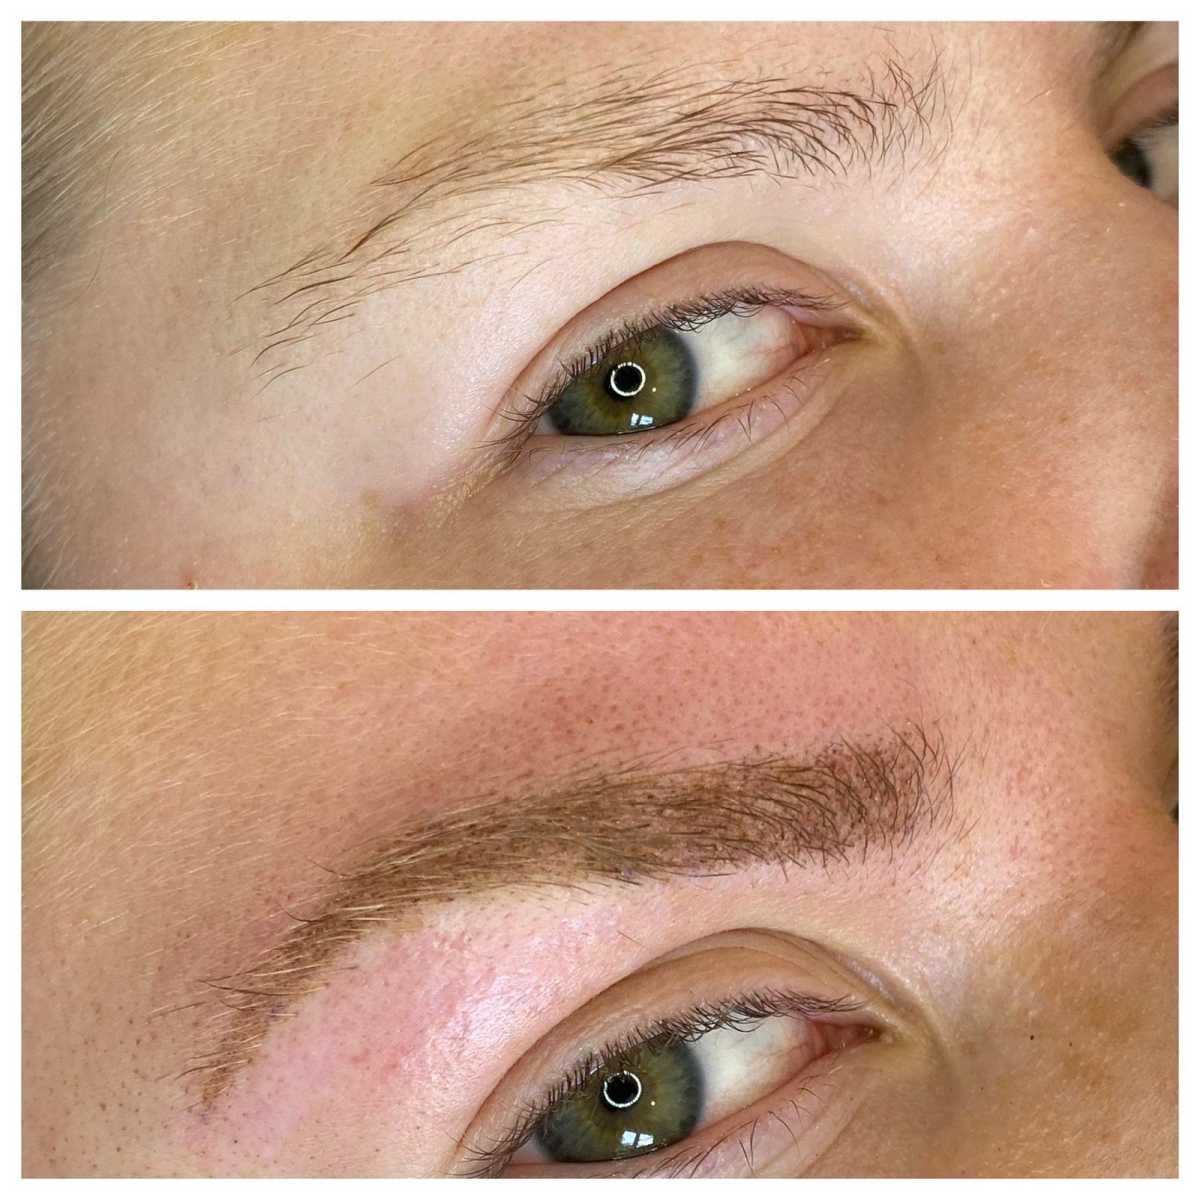 Before and After Microblading Eyebrows